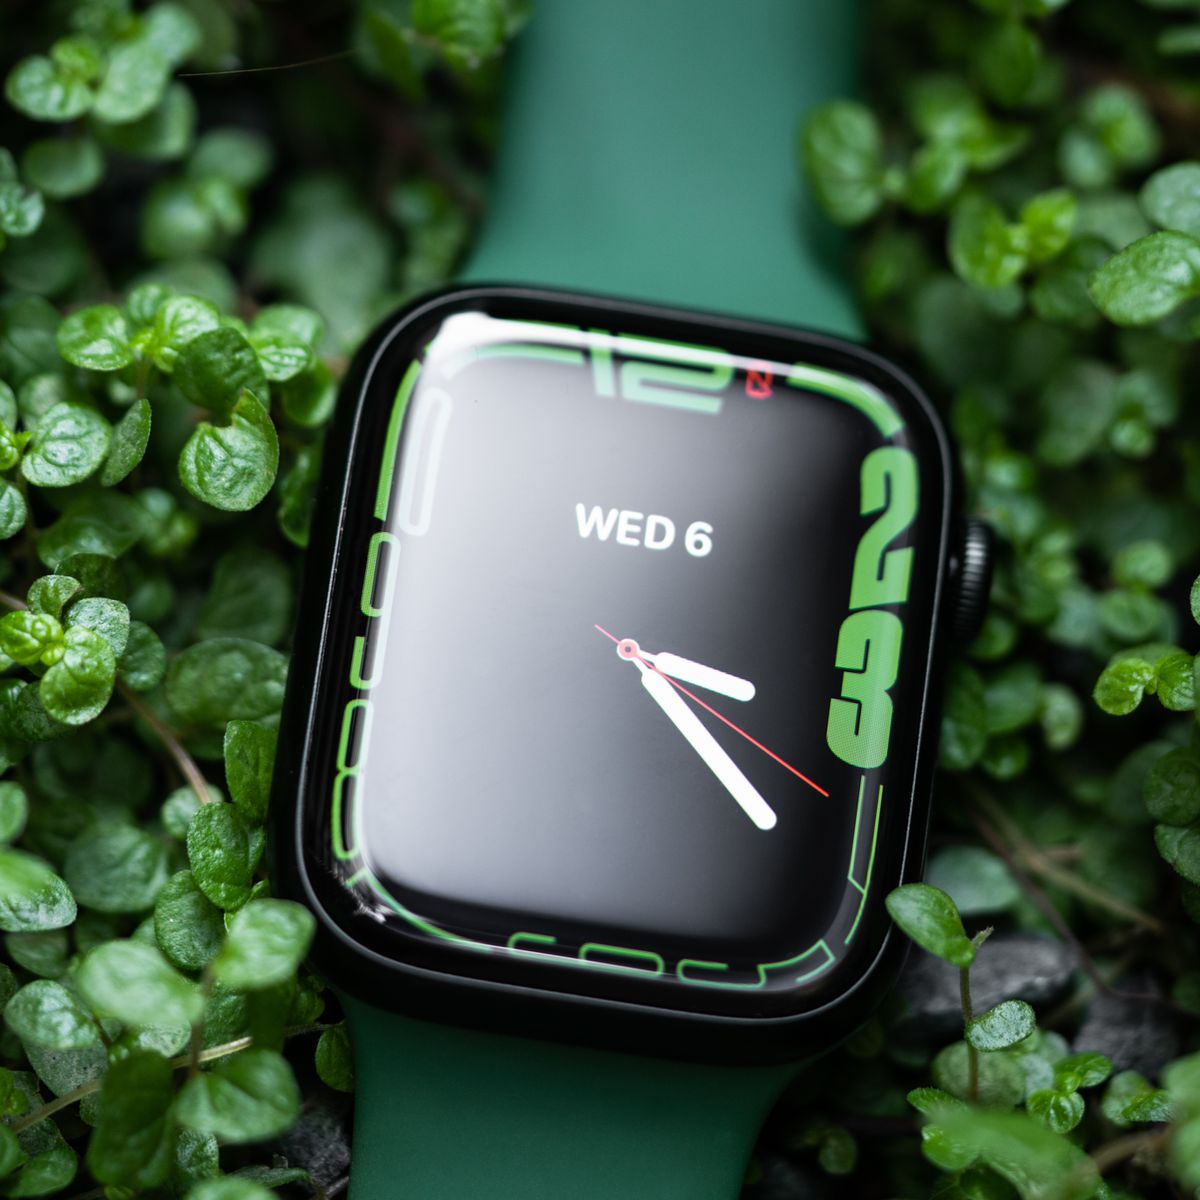 The Apple Watch Series 7 in green.